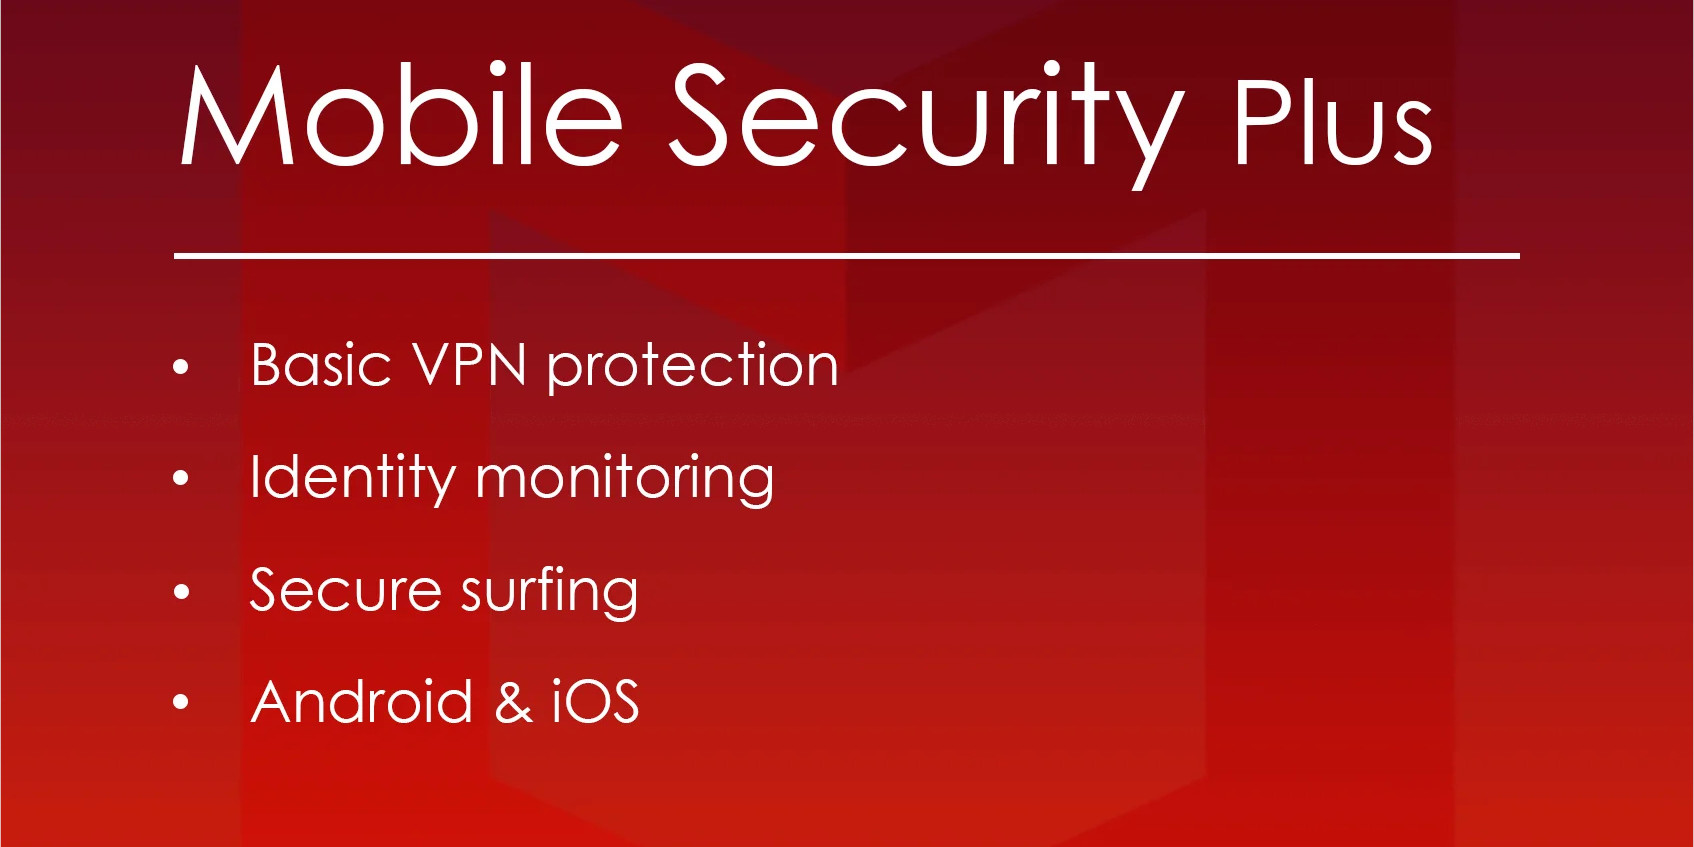 McAfee Mobile Security Plus VPN Key (1 Year / Unlimited Devices) $6.75